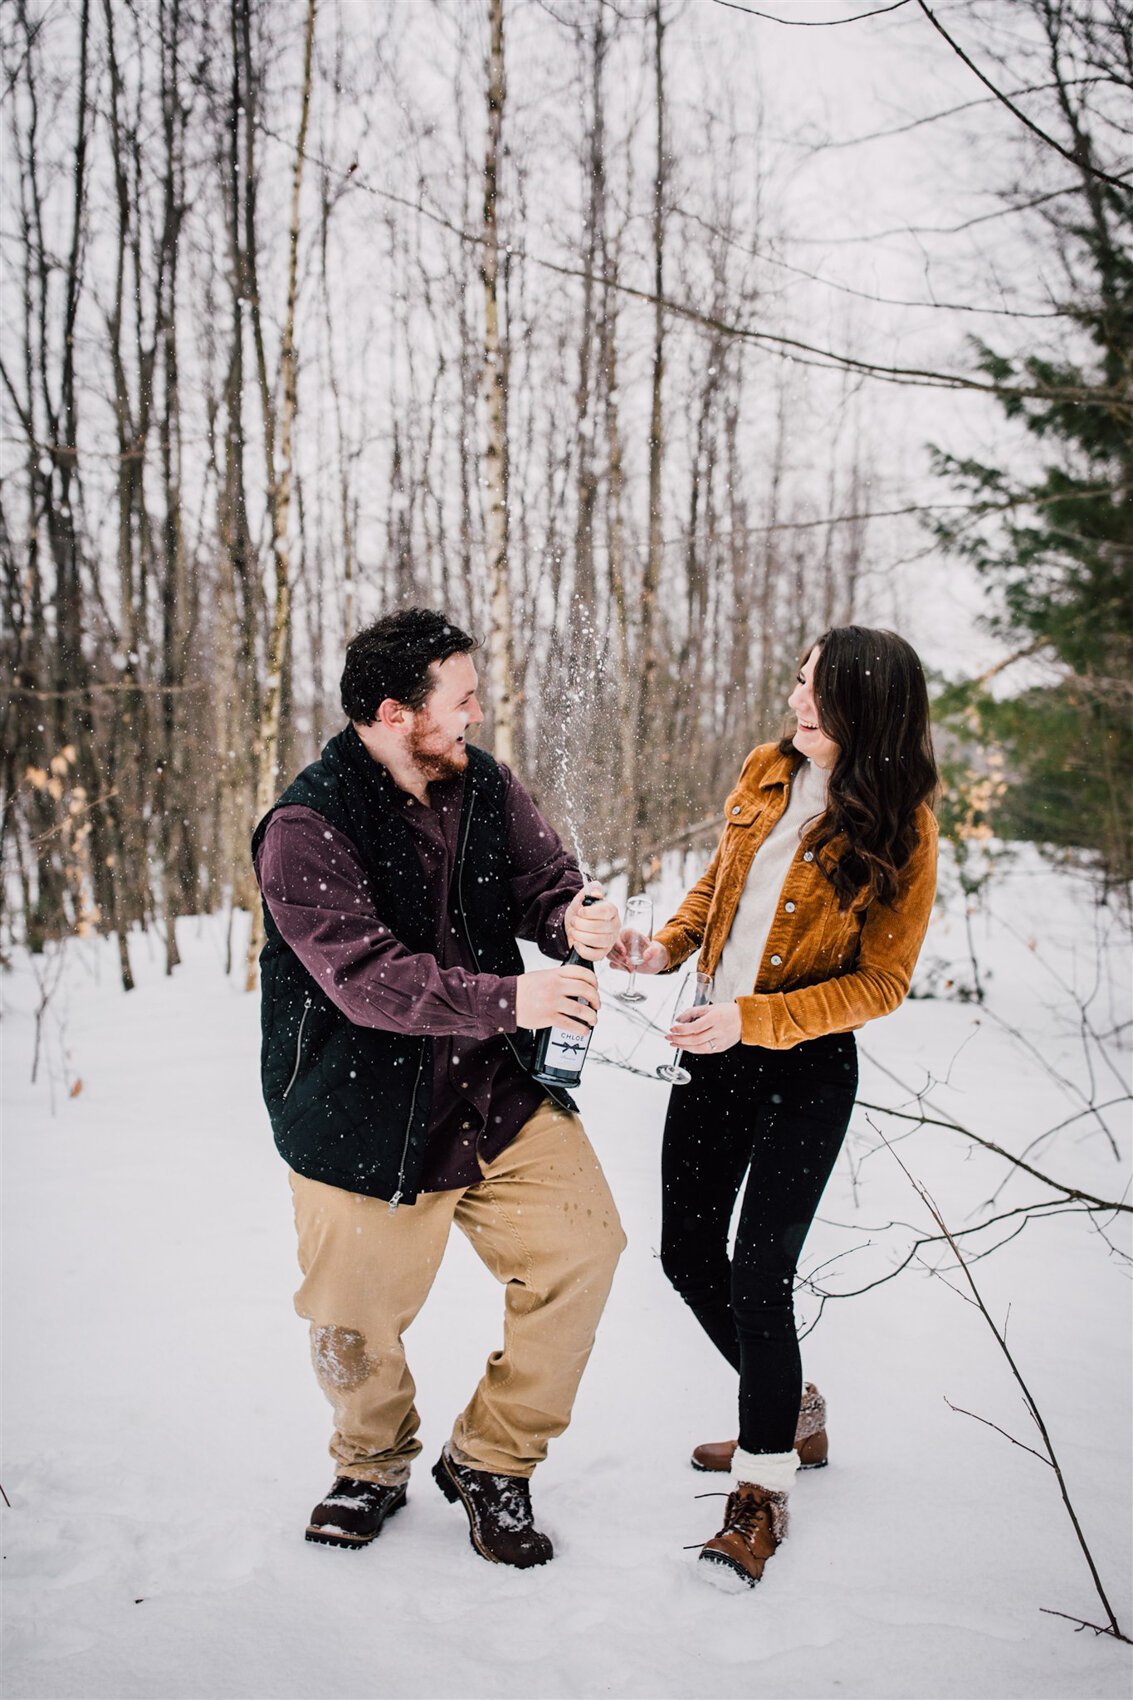 Carlie-and-Joe-Engagement-Pictures-Winter-2020-11.jpg